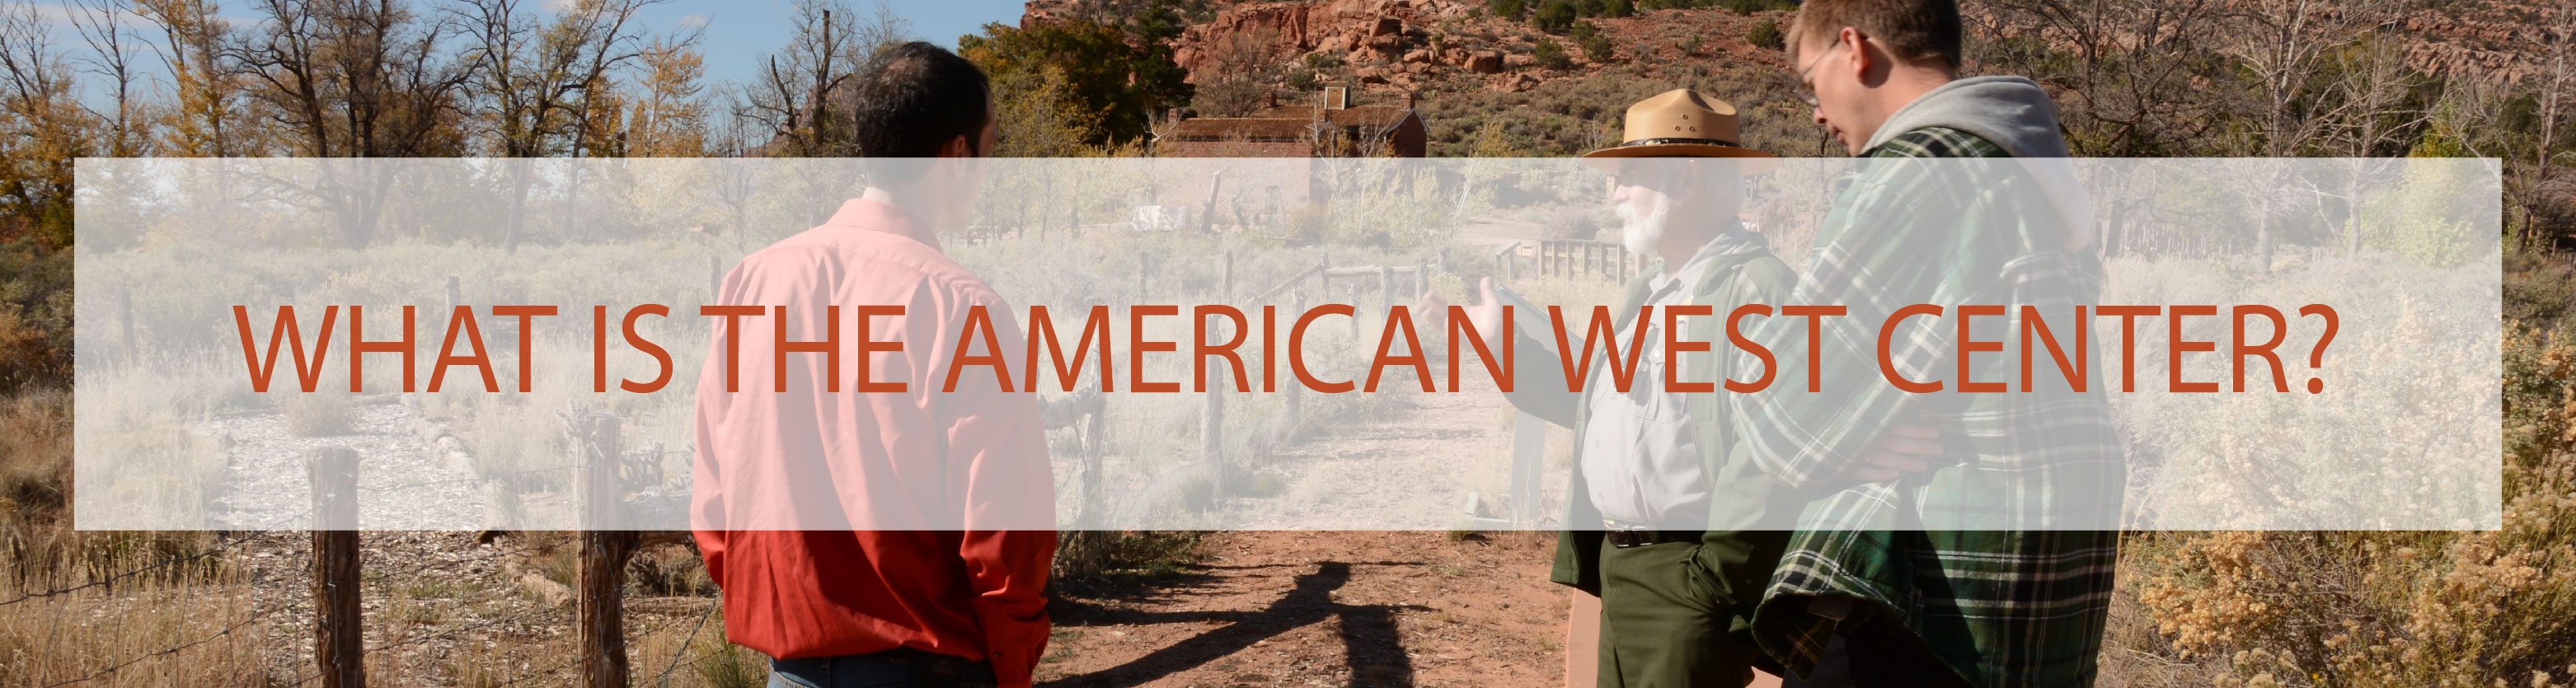 What is the American West Center?